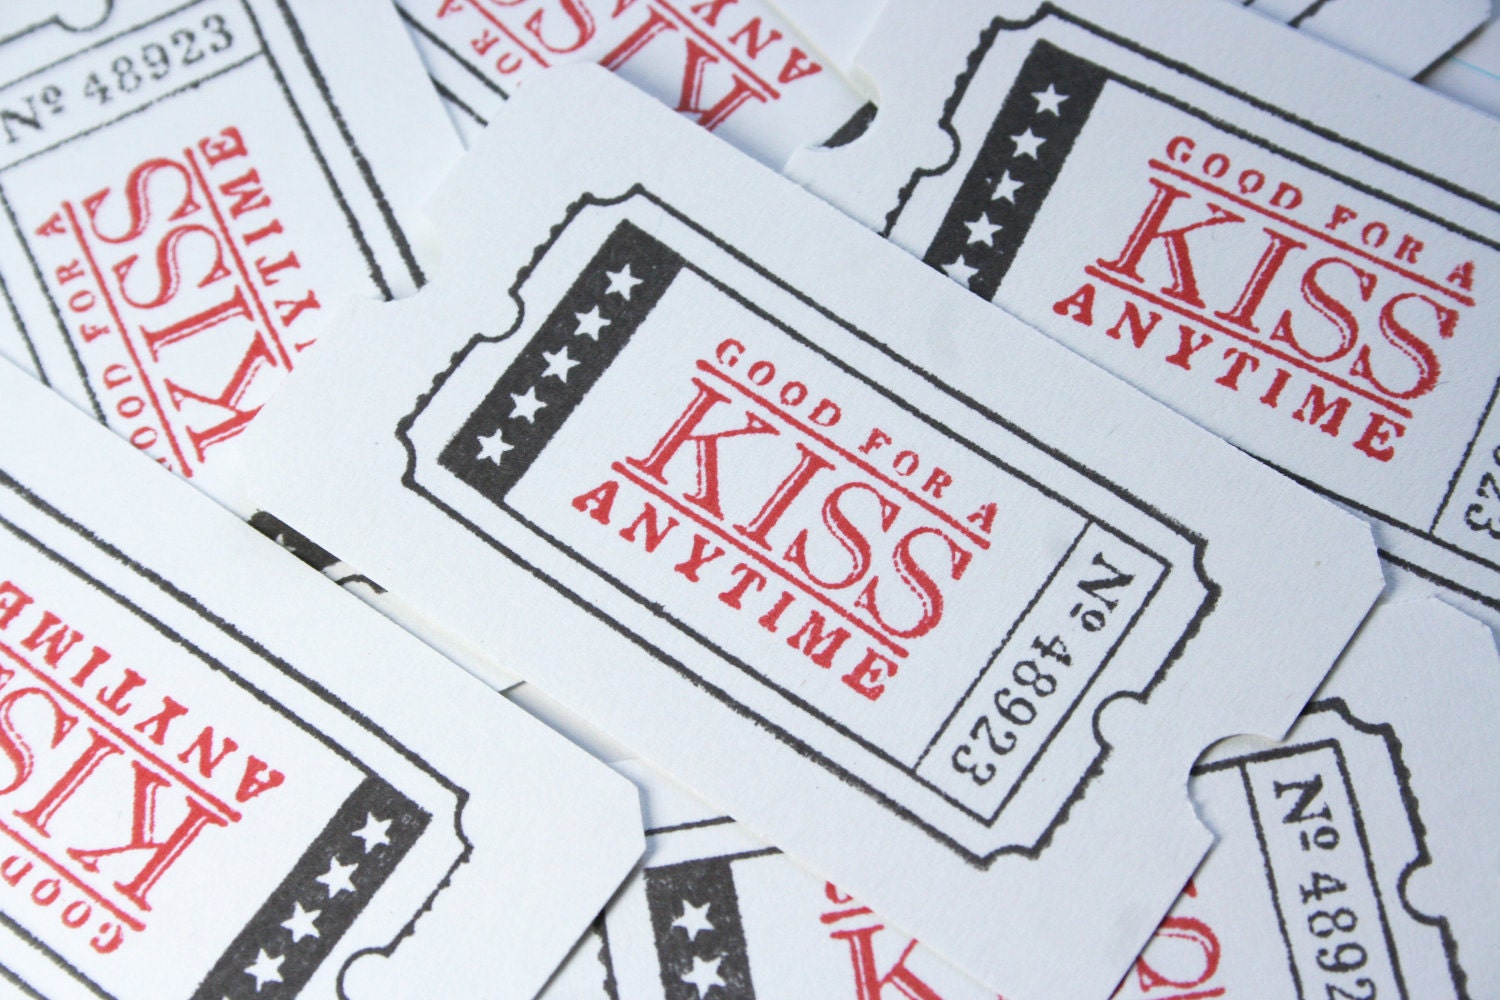 Free Kiss Ticket Coupon Love Coupons Hand by TheOrangeSparrow